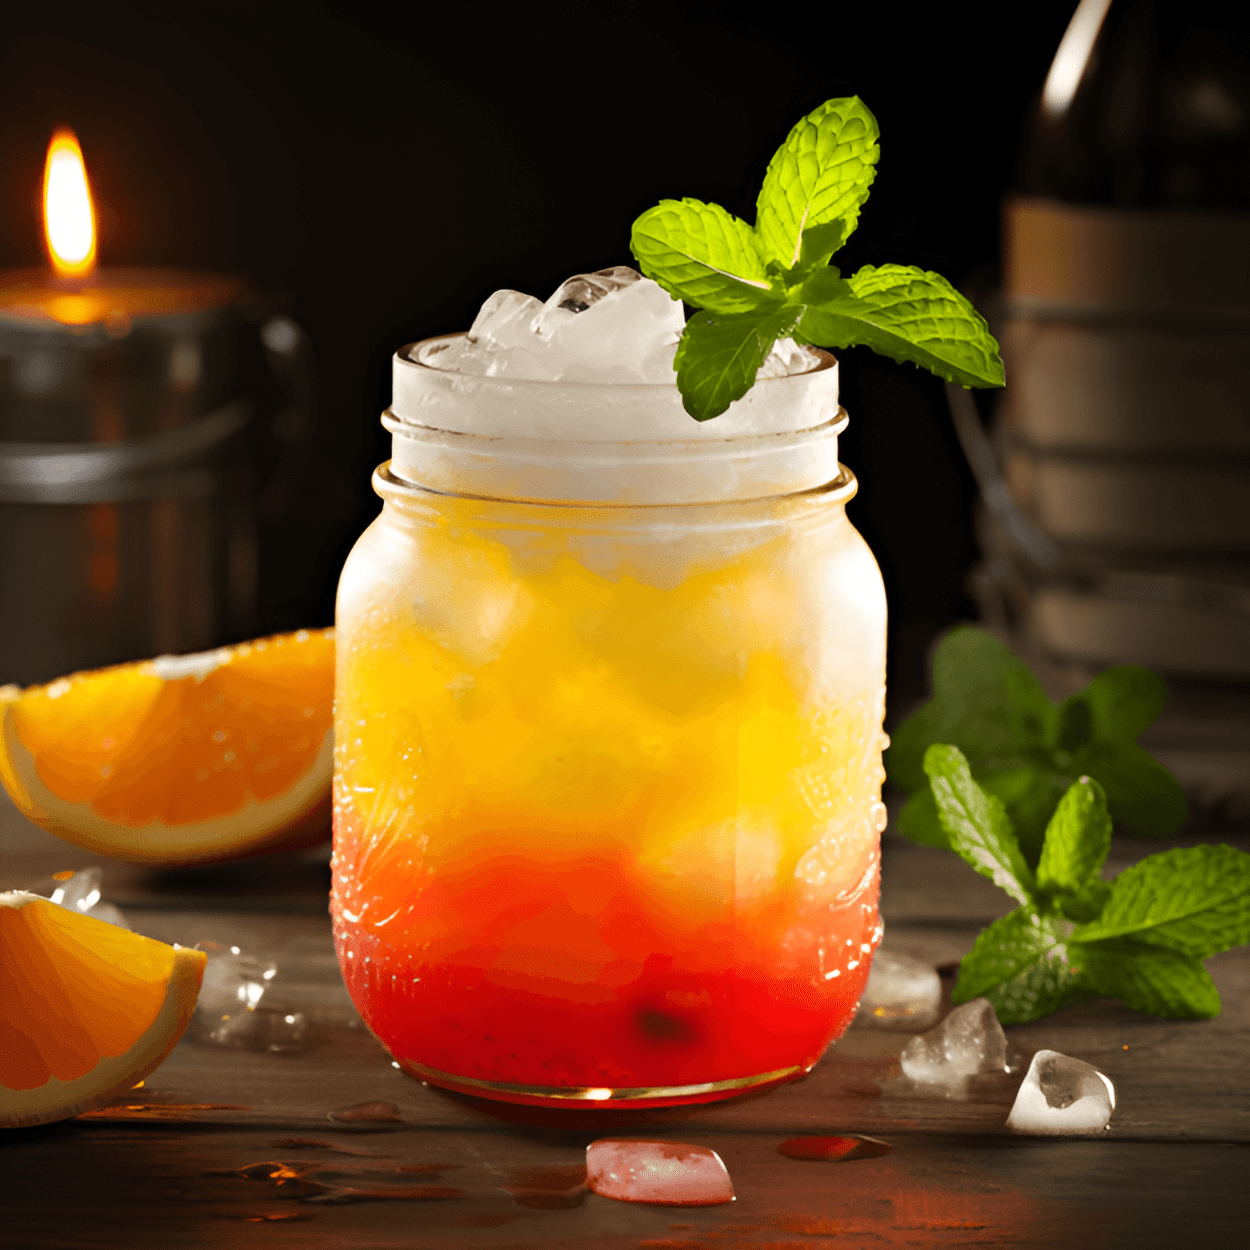 Irish Wake Cocktail Recipe - The Irish Wake is a potent, sweet, and fruity cocktail. It has a strong citrus flavor from the orange and pineapple juices, balanced by the sweetness of the grenadine and the kick of the Irish whiskey. The taste is rounded off with a hint of mint.